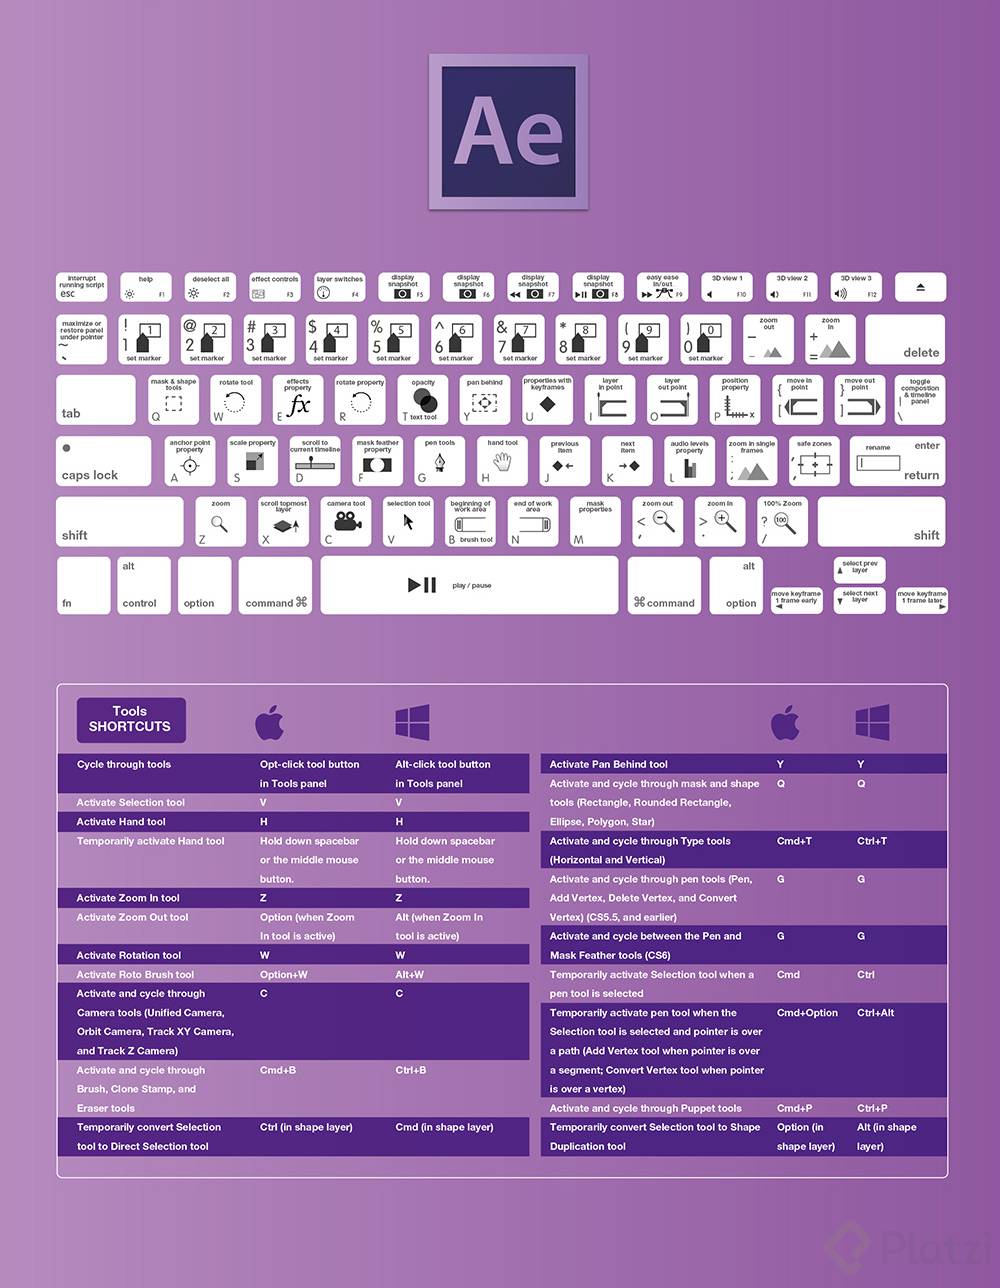 The-Complete-Adobe-After-Effects-CC-Keyboard-Shortcuts-For-Designers-Guide-2015.jpg